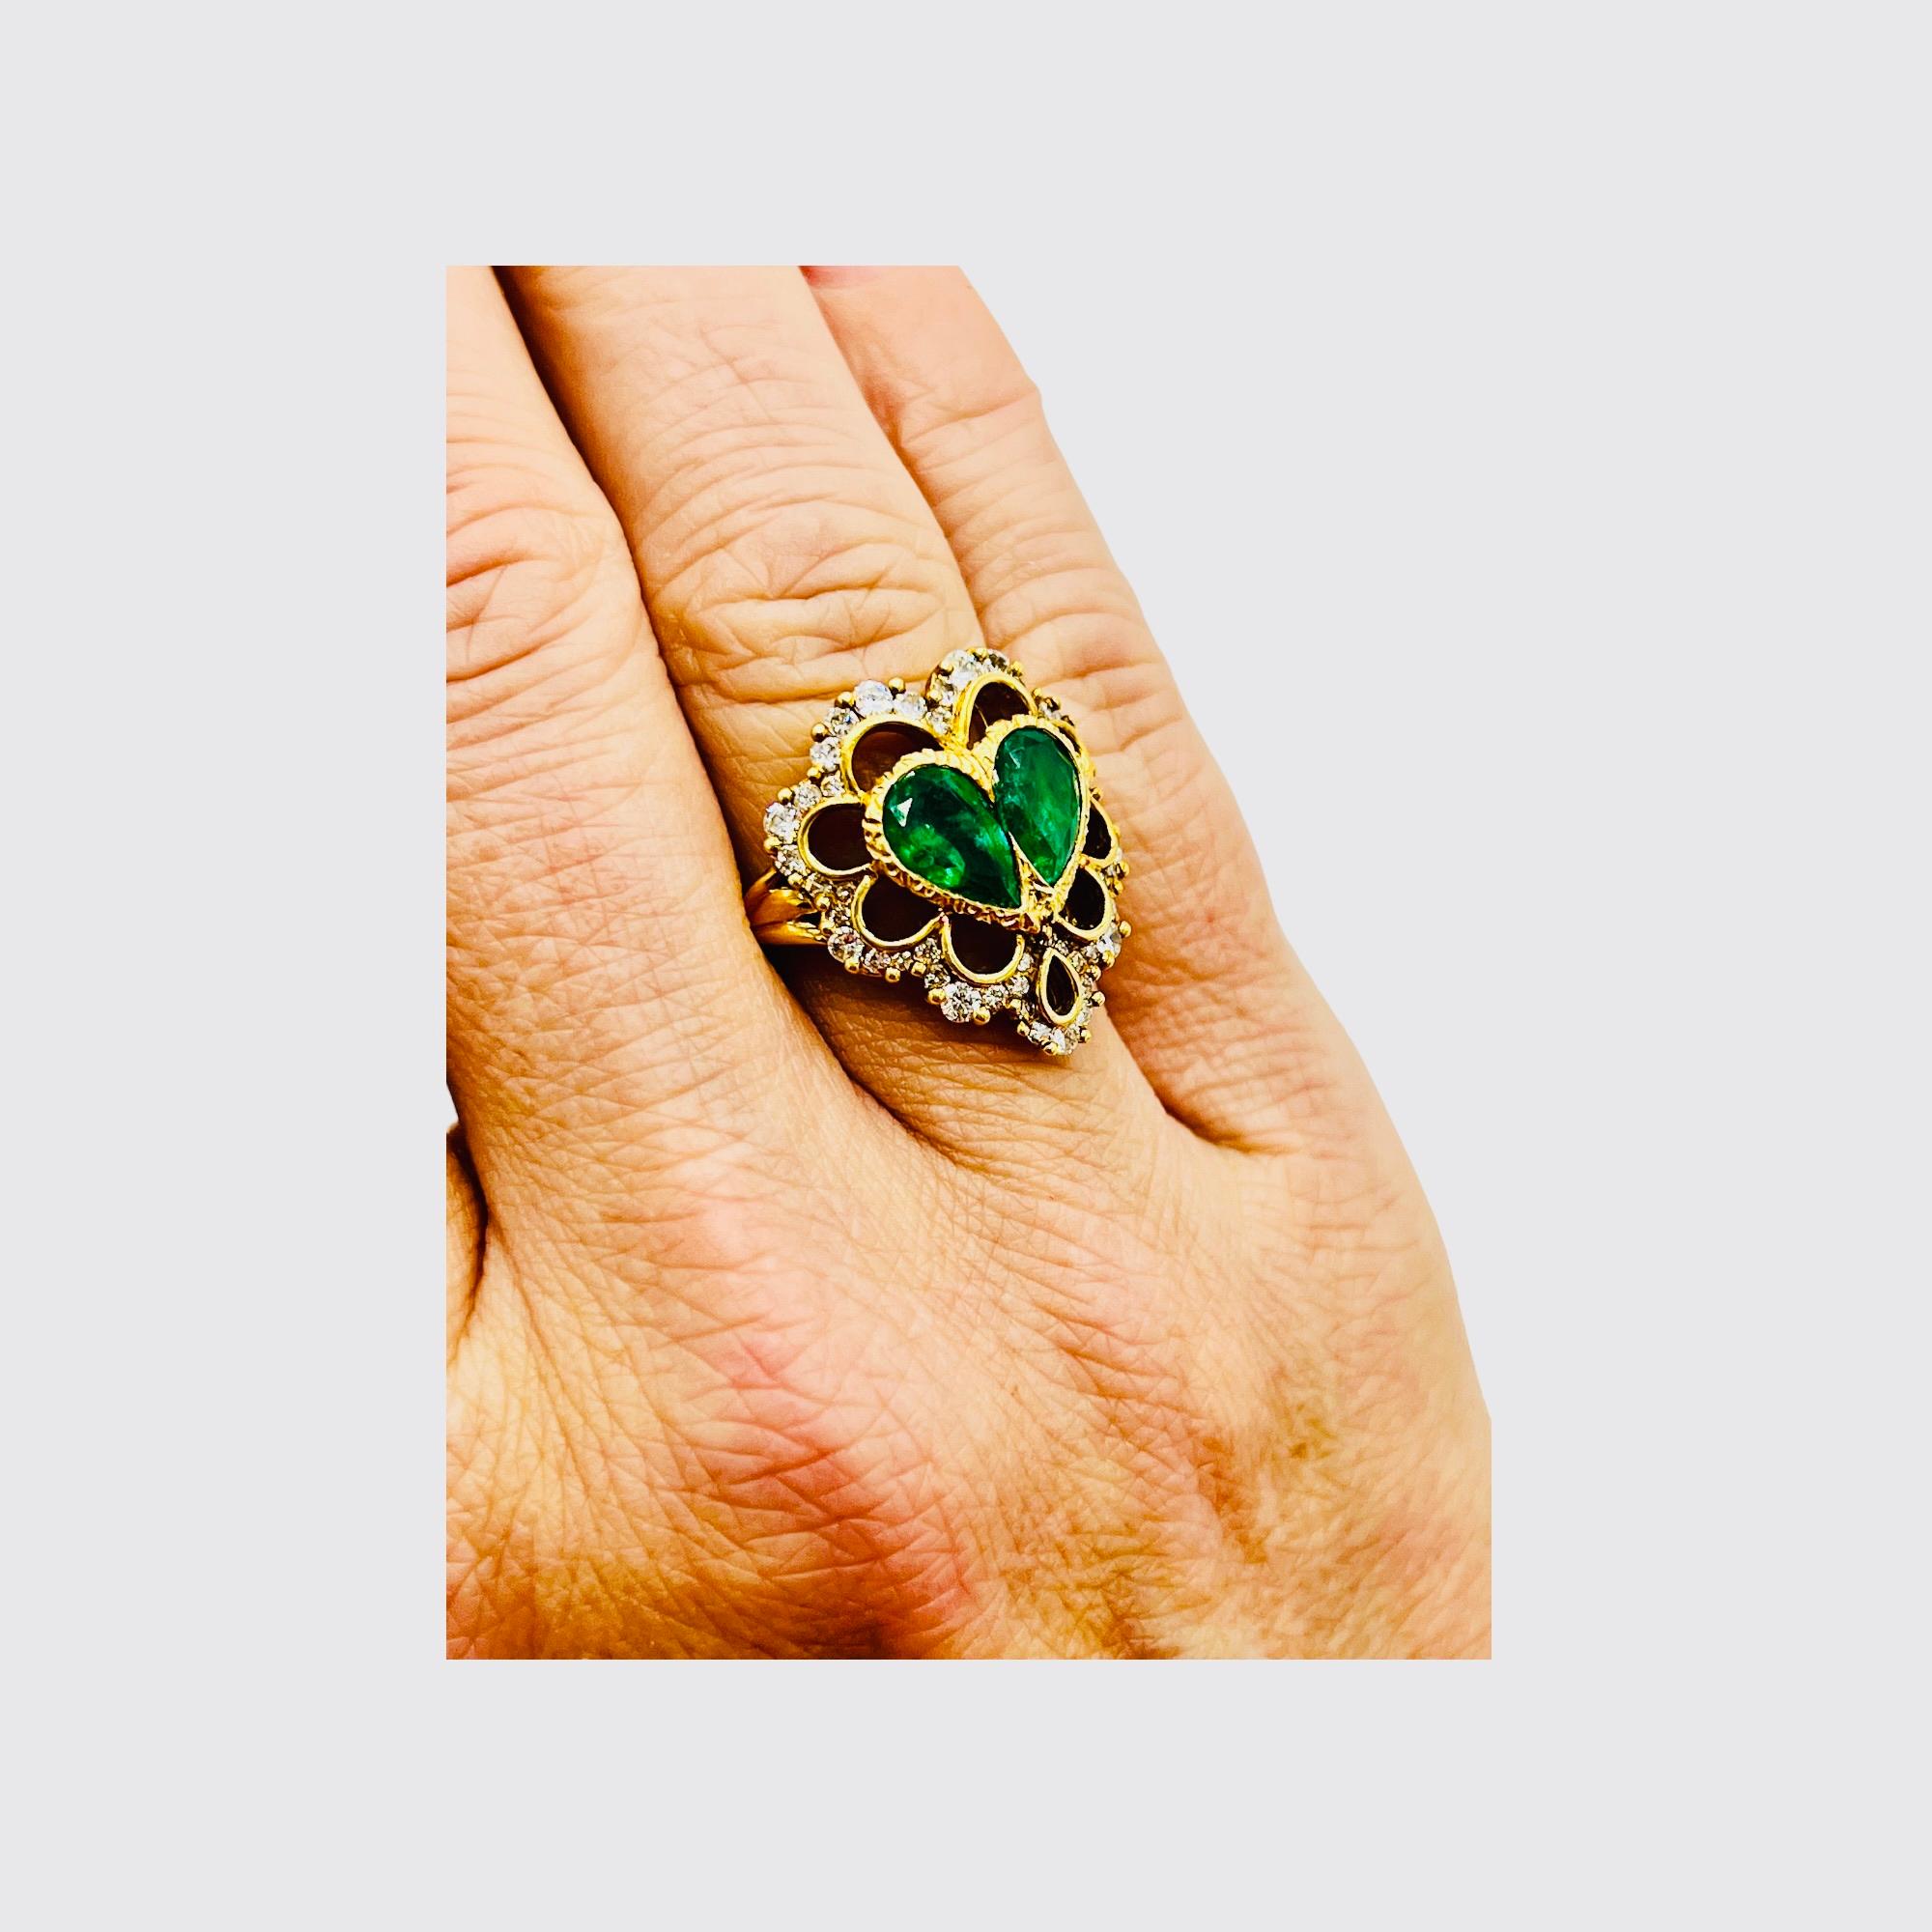 18-carat yellow gold ring set with two emeralds of bright green color, pear-shaped, faceted, weighing 1.50 carats each, i.e. approximately 3 ct in total, surrounded by a pavé of diamonds for approximately 0.60 carat in total
model reminiscent of the